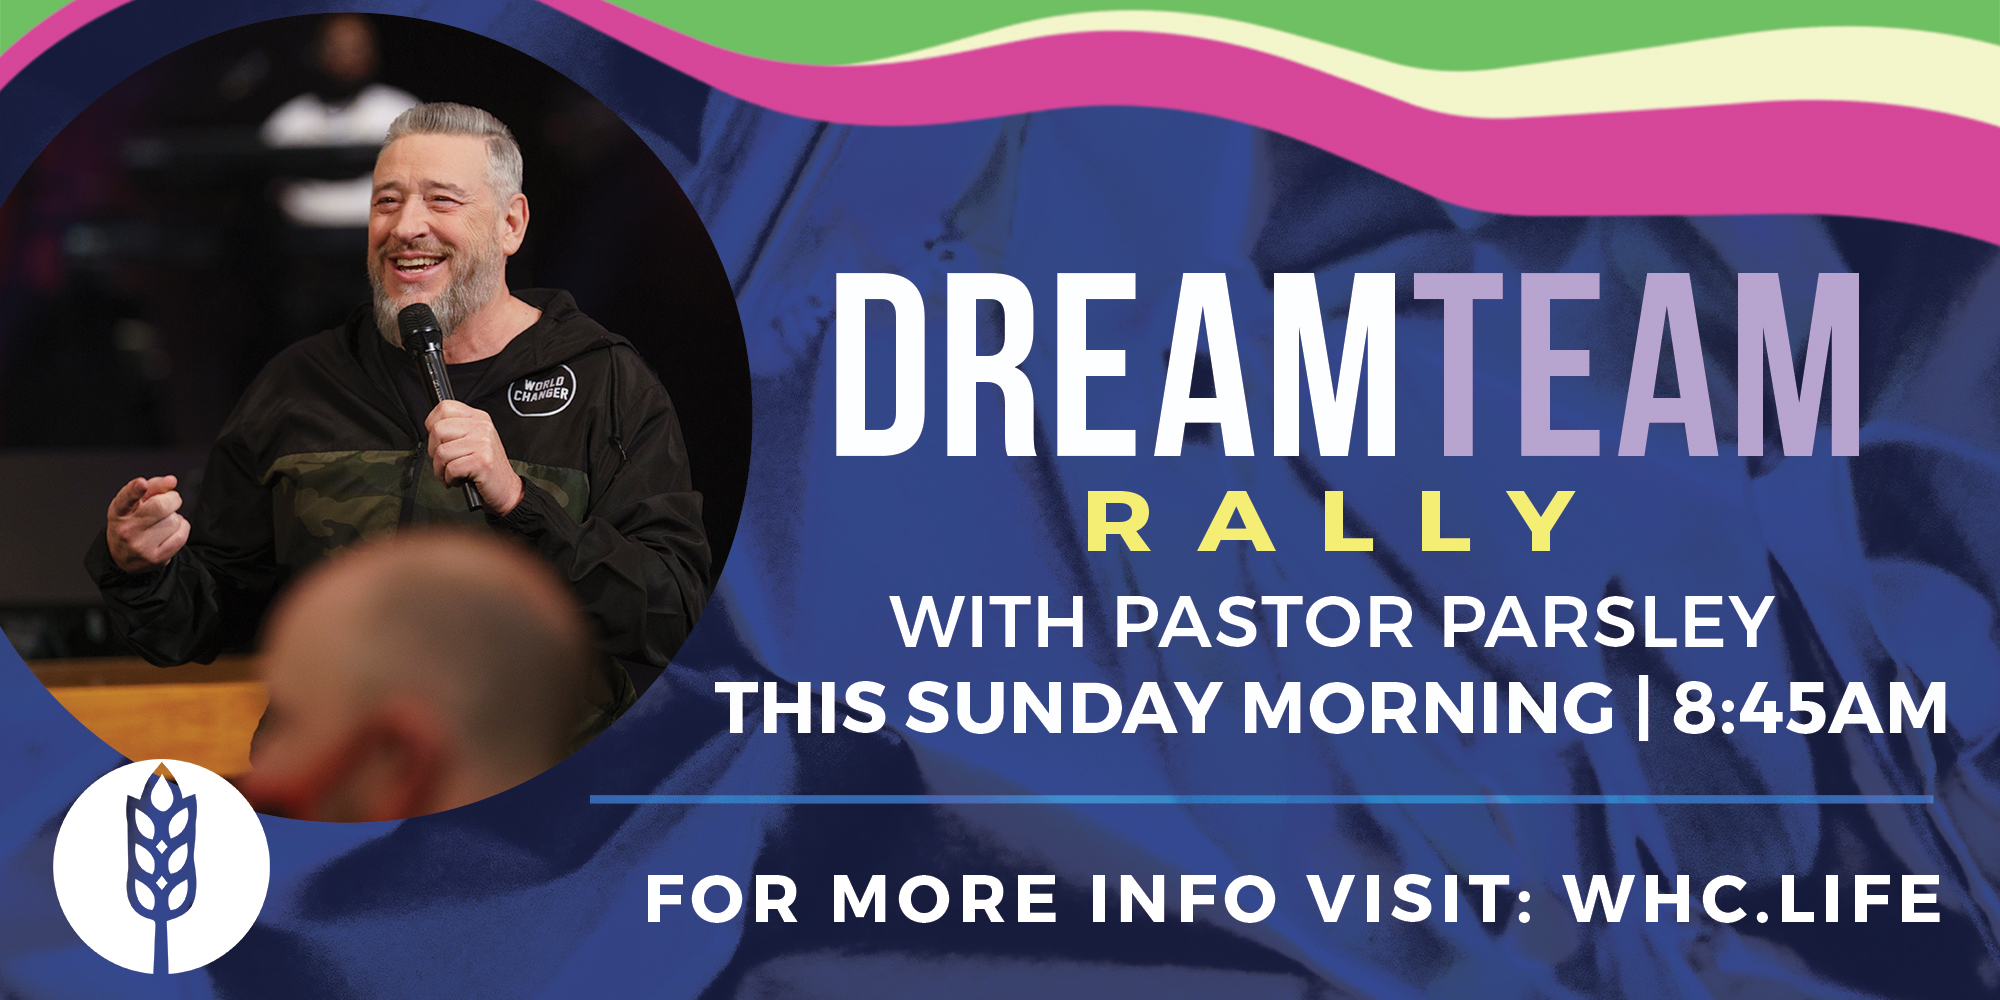 DreamTEAM Rally with Pastor Parsley This Sunday Mornings 8:45AM